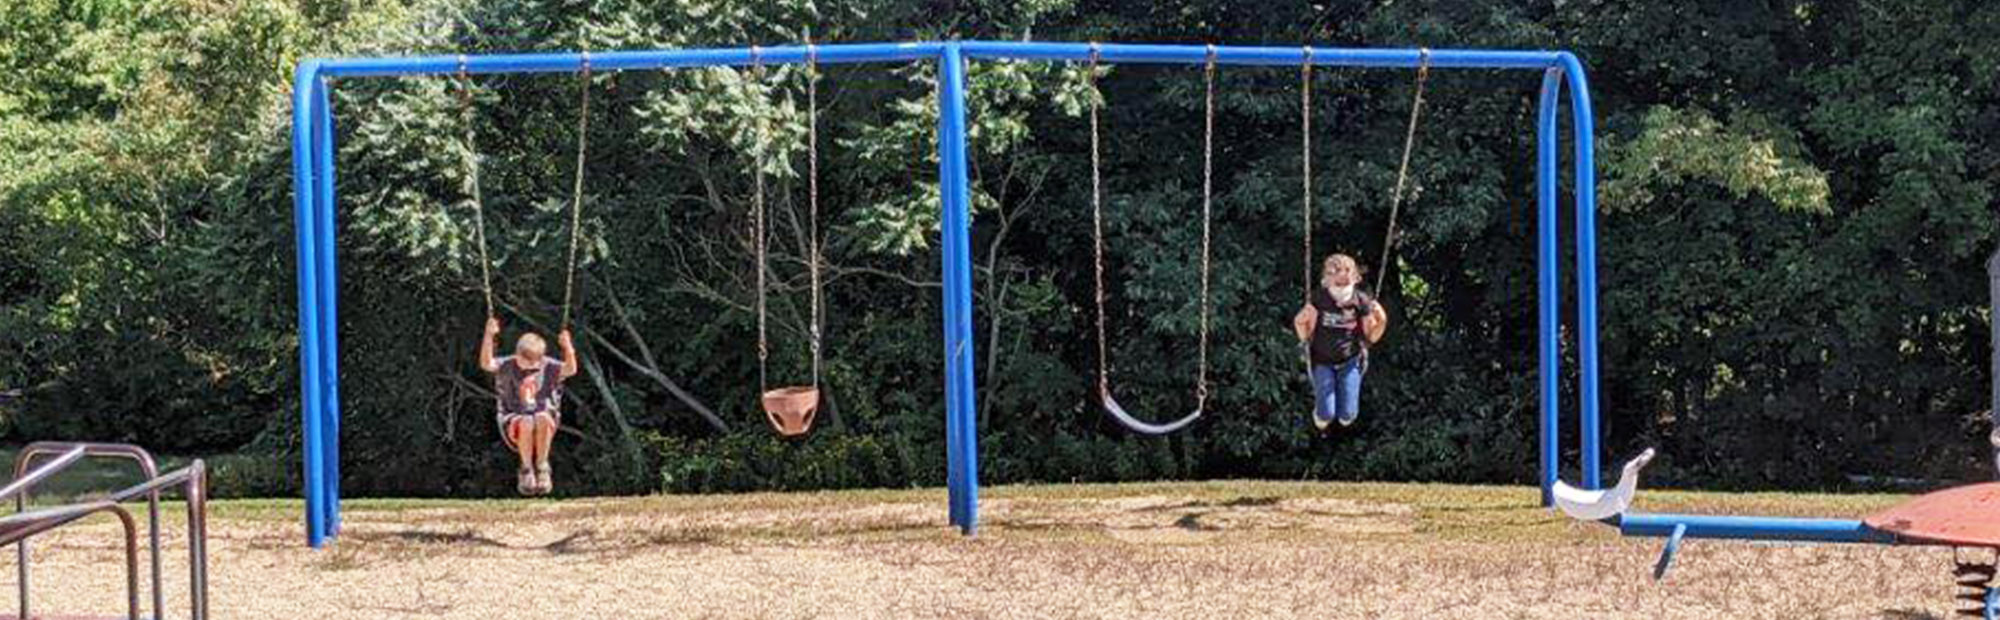 Students enjoying the swings on the school playground